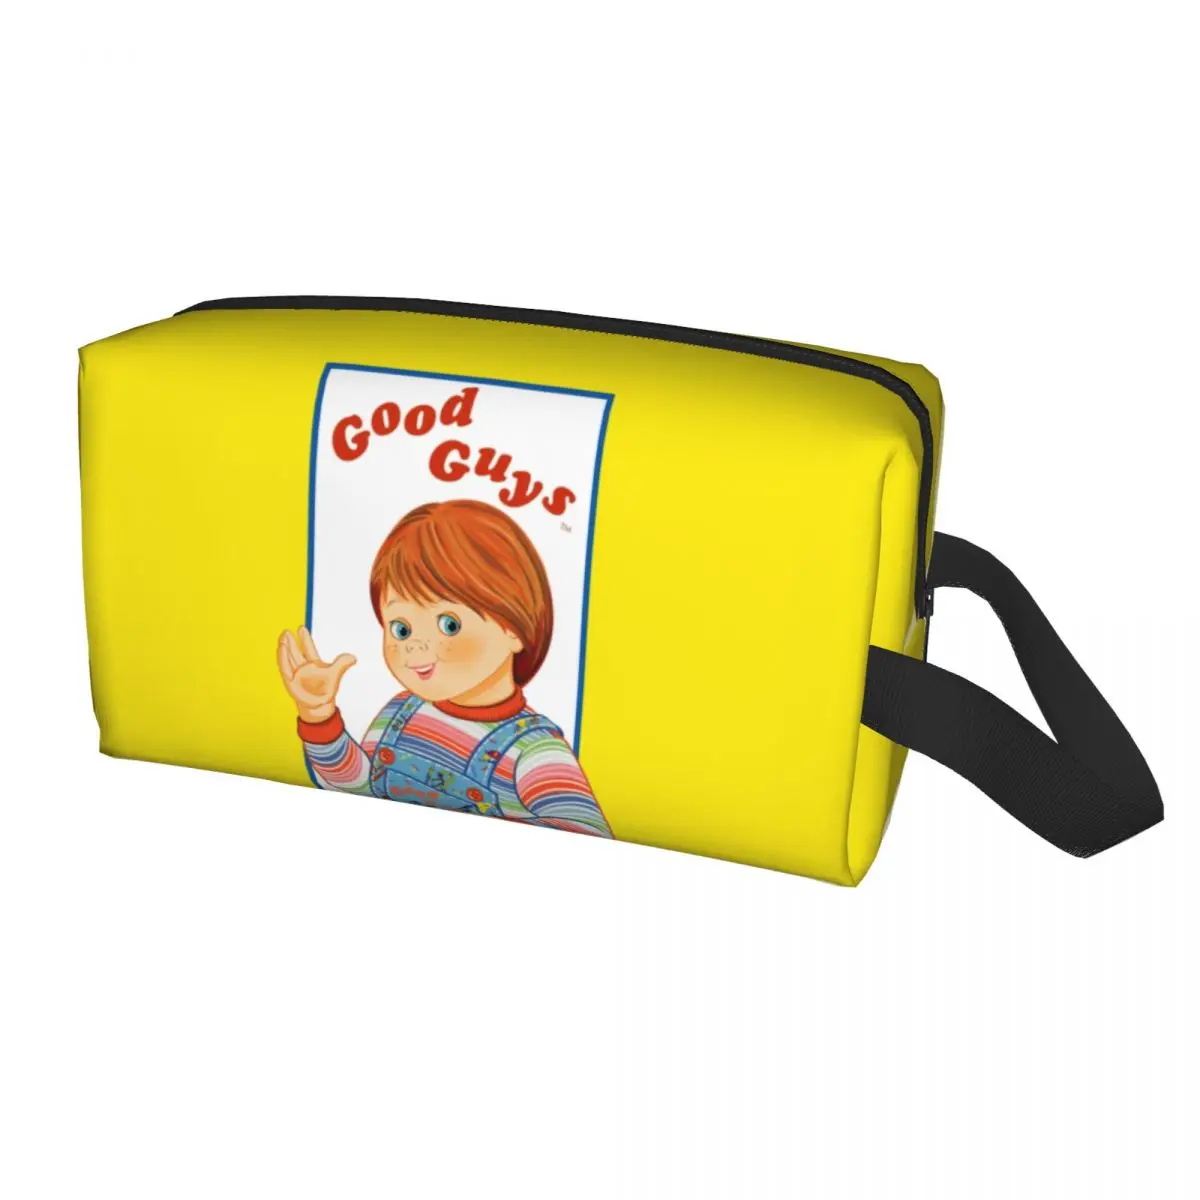 

Travel Good Guys Chucky Toiletry Bag Cute Child's Play Doll Makeup Cosmetic Organizer for Women Beauty Storage Dopp Kit Case